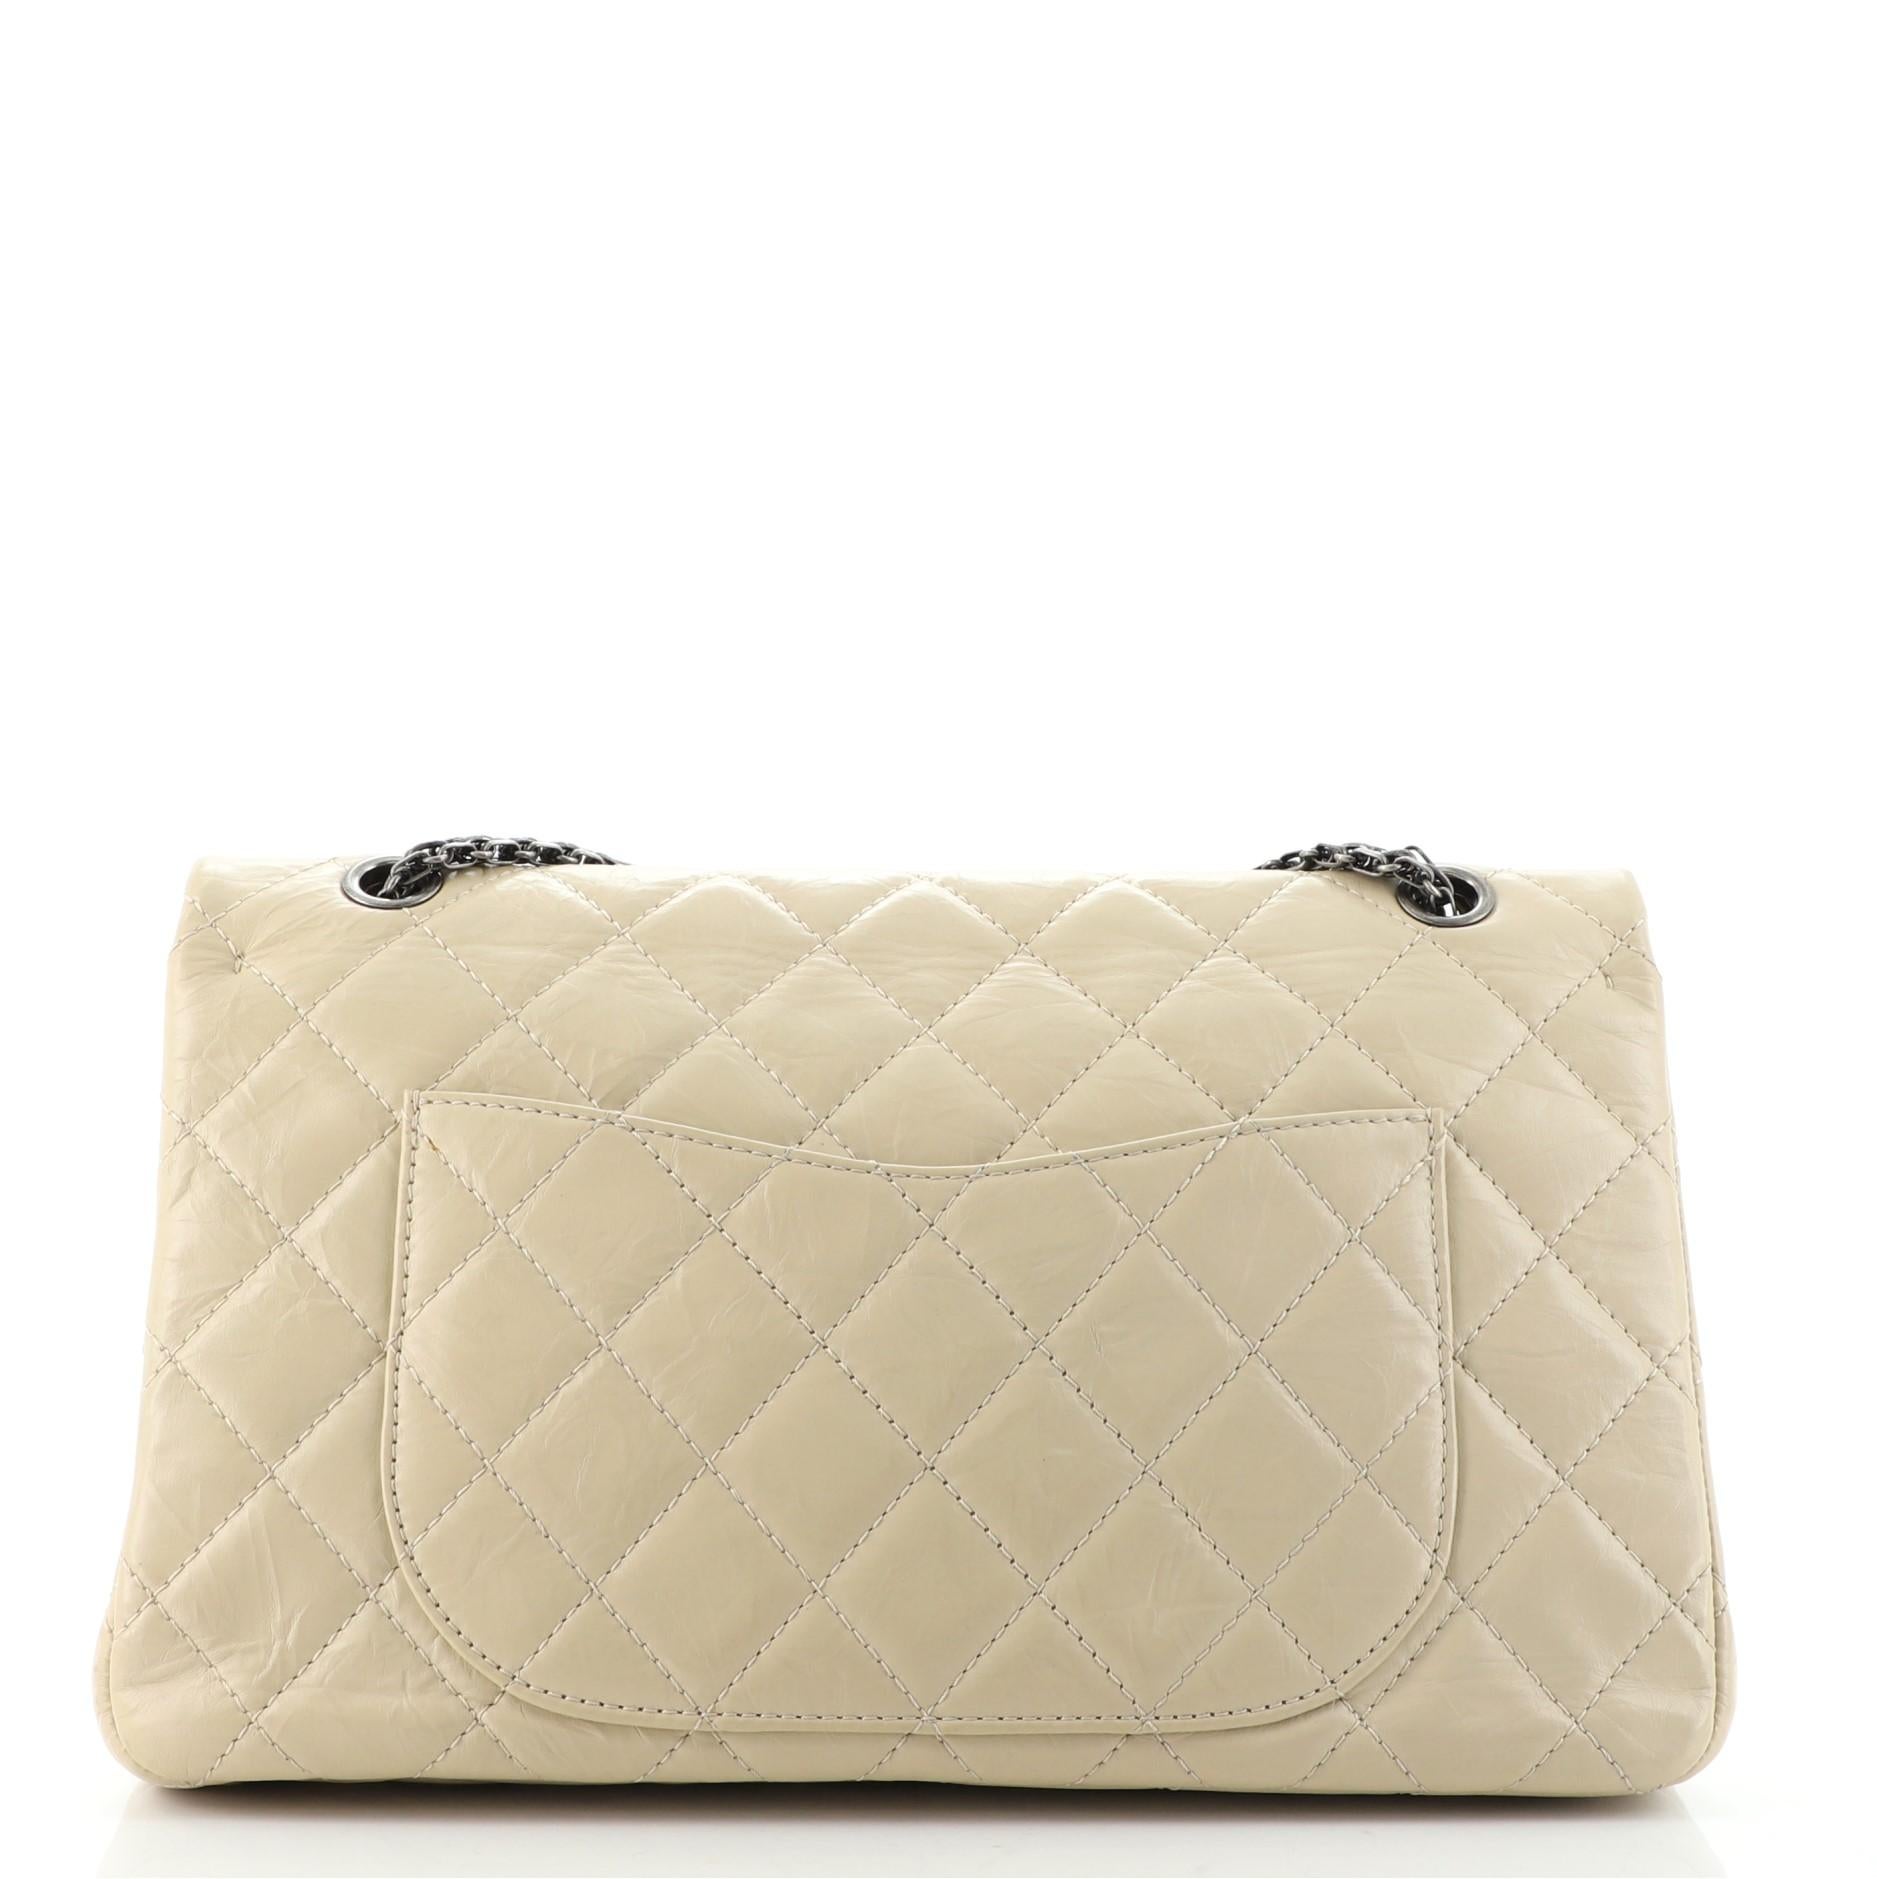 Beige Chanel Reissue 2.55 Flap Bag Quilted Aged Calfskin 227